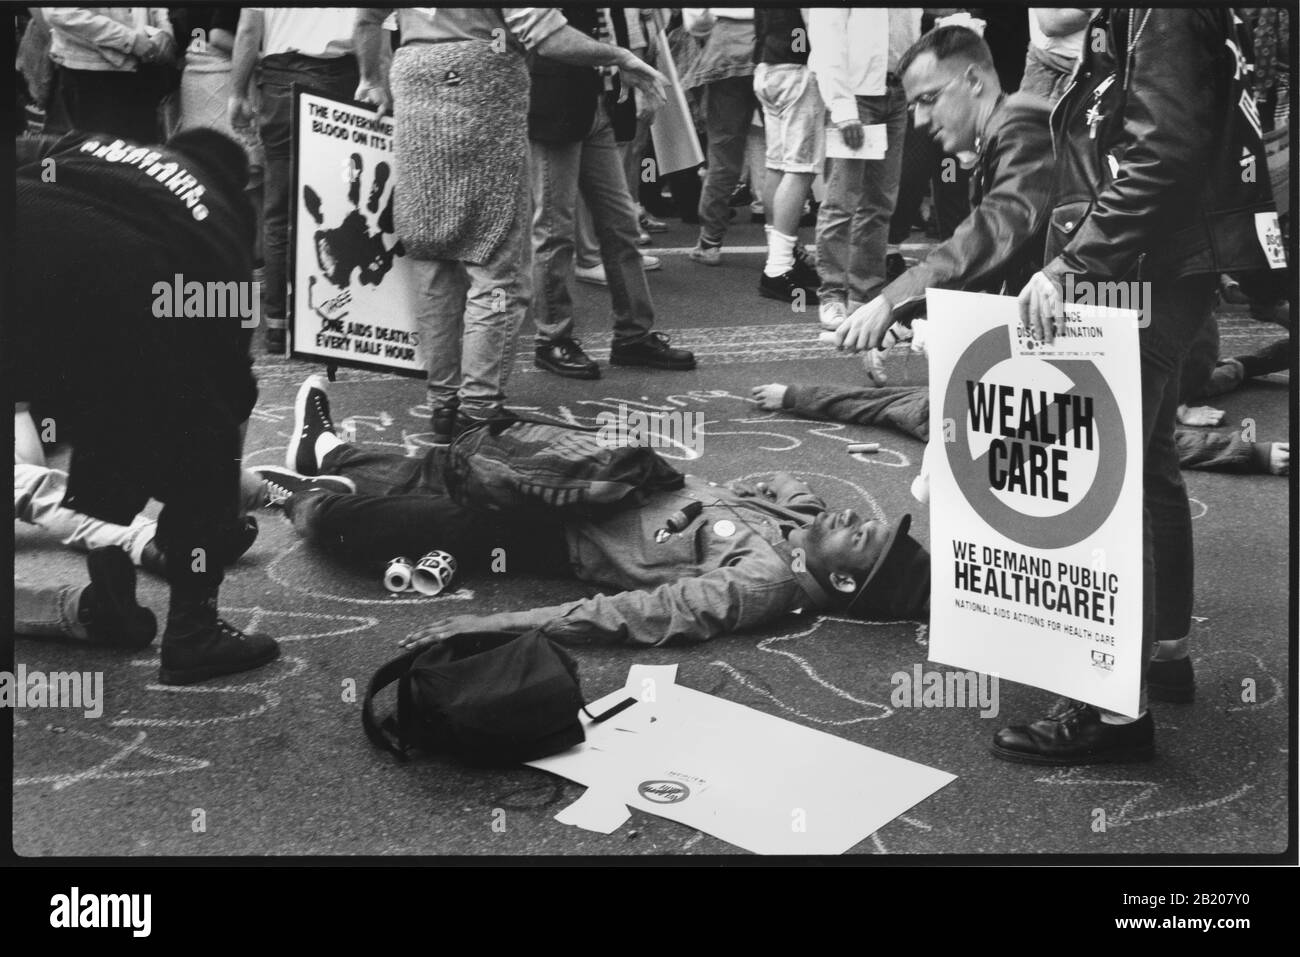 ACT UP National demonstration Chicago IL April 23 1990 - An activist from ACT UP performs a DIE IN (laying down in the street and allowing another activist to draw a chalk body outline to symbolise the people who have died of AIDS) during a protest outside of the American Medical Association. Protestors asked for a real health care system in the USA, more care for people with AIDS, more research money for people with AIDS, a reduction to the cost of coverage and an end to the ability of insurance companies to stop coverage when people were diagnosed with Acquired Immune Deficiency Syndrome. Stock Photo